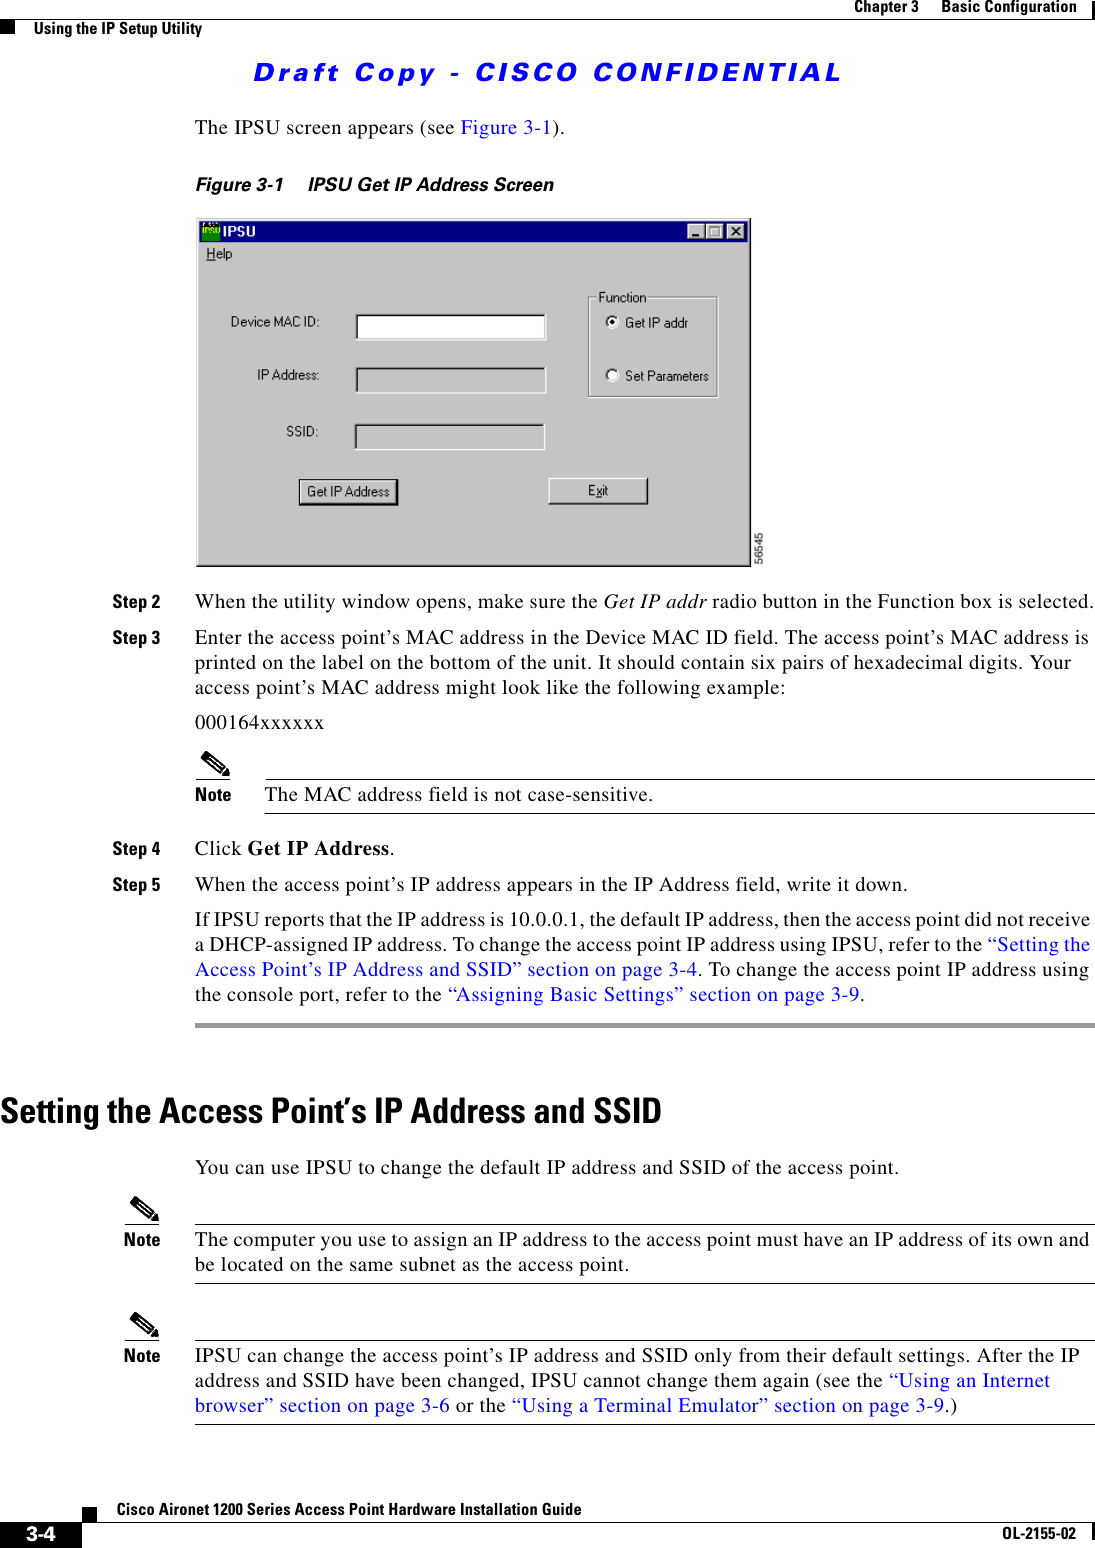 Draft Copy - CISCO CONFIDENTIAL 3-4Cisco Aironet 1200 Series Access Point Hardware Installation GuideOL-2155-02Chapter 3      Basic ConfigurationUsing the IP Setup UtilityThe IPSU screen appears (see Figure 3-1).Figure 3-1 IPSU Get IP Address ScreenStep 2 When the utility window opens, make sure the Get IP addr radio button in the Function box is selected.Step 3 Enter the access point’s MAC address in the Device MAC ID field. The access point’s MAC address is printed on the label on the bottom of the unit. It should contain six pairs of hexadecimal digits. Your access point’s MAC address might look like the following example:000164xxxxxxNote The MAC address field is not case-sensitive.Step 4 Click Get IP Address.Step 5 When the access point’s IP address appears in the IP Address field, write it down. If IPSU reports that the IP address is 10.0.0.1, the default IP address, then the access point did not receive a DHCP-assigned IP address. To change the access point IP address using IPSU, refer to the “Setting the Access Point’s IP Address and SSID” section on page 3-4. To change the access point IP address using the console port, refer to the “Assigning Basic Settings” section on page 3-9.Setting the Access Point’s IP Address and SSIDYou can use IPSU to change the default IP address and SSID of the access point. Note The computer you use to assign an IP address to the access point must have an IP address of its own and be located on the same subnet as the access point.Note IPSU can change the access point’s IP address and SSID only from their default settings. After the IP address and SSID have been changed, IPSU cannot change them again (see the “Using an Internet browser” section on page 3-6 or the “Using a Terminal Emulator” section on page 3-9.)